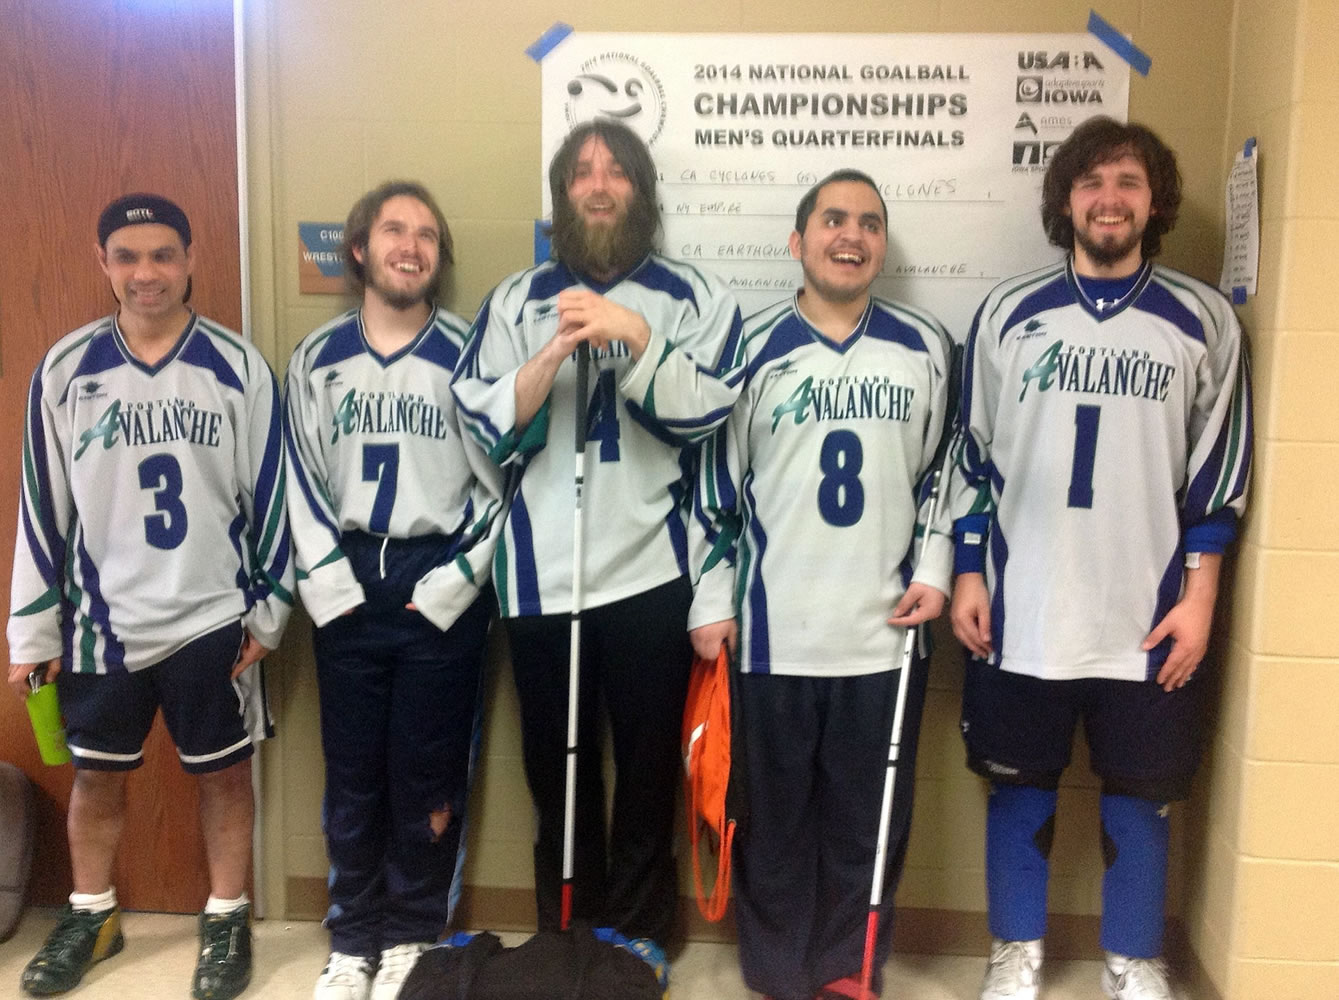 Esther Short: The Northwest Avalanche men's goalball team, who took fourth place in national championships, are (from left) Nov Gnik, T.J.